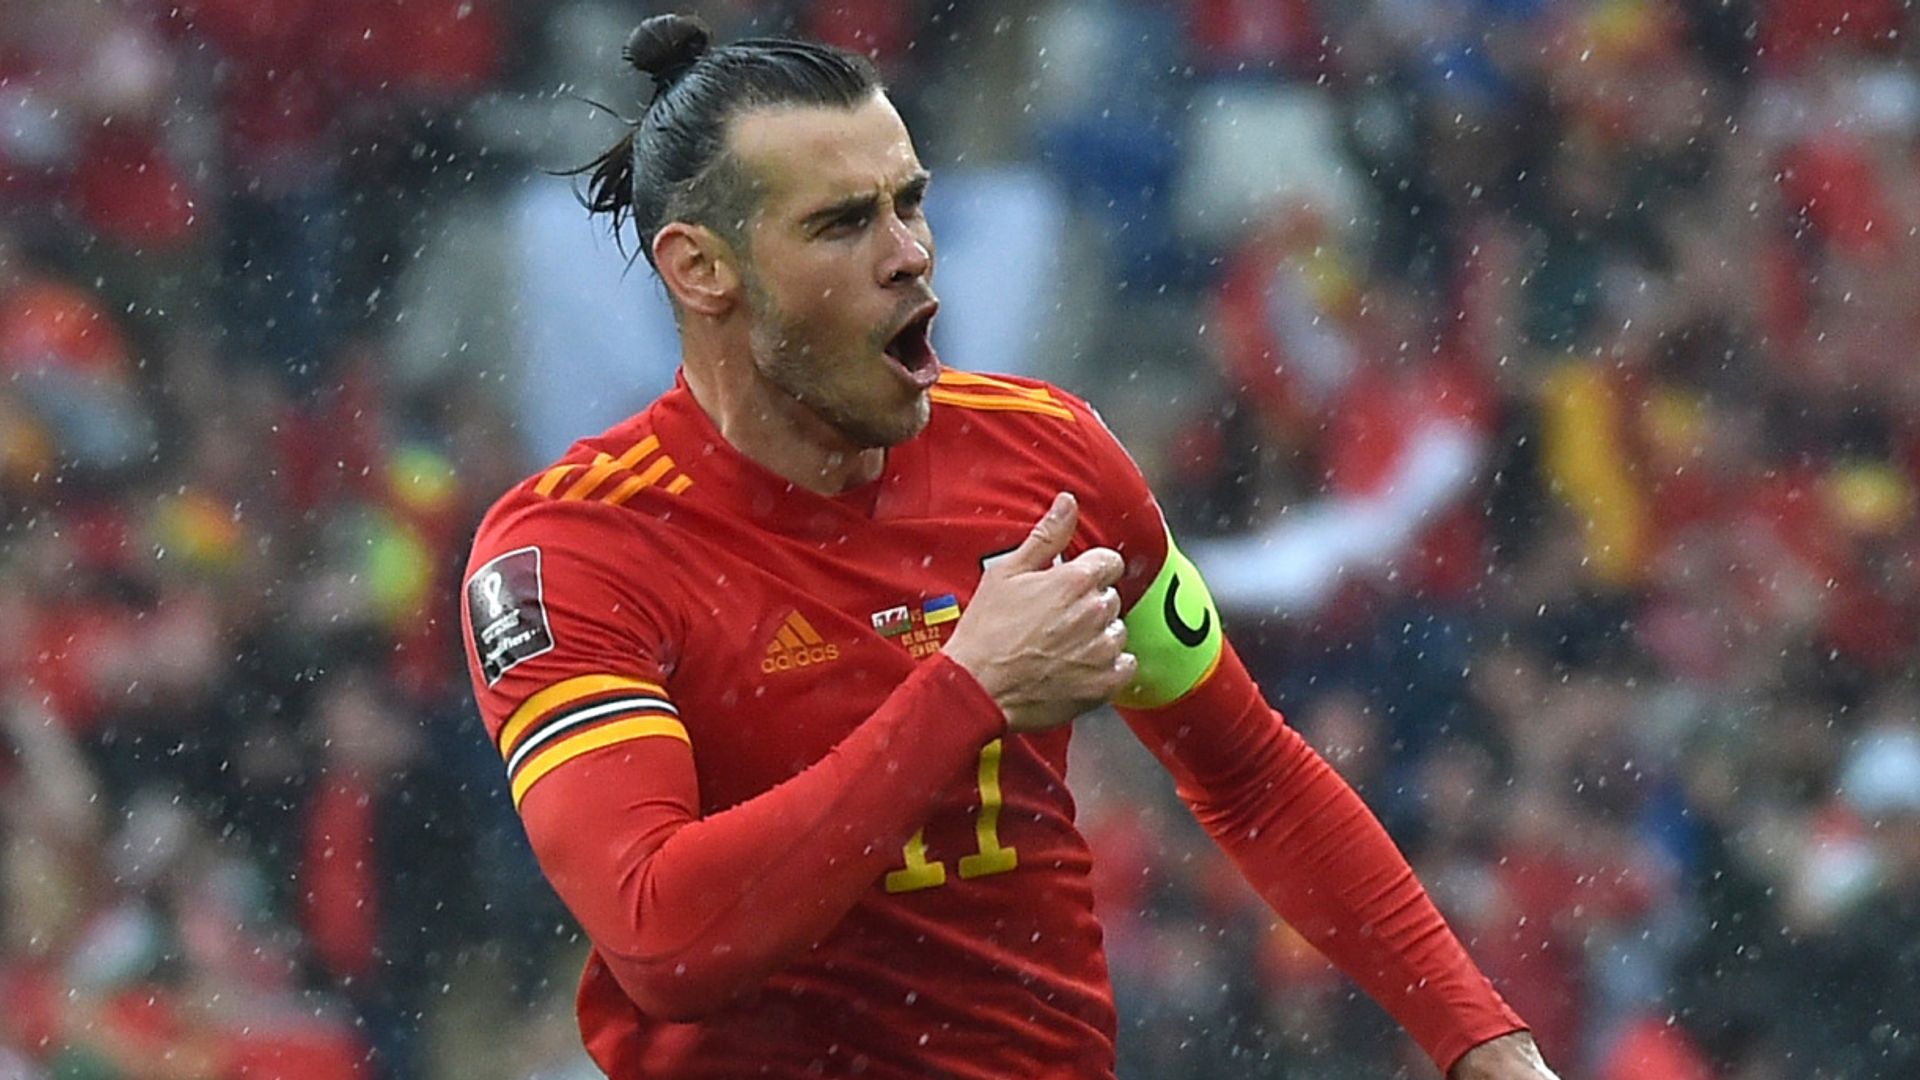 Bale: Wales' greatest result | Page: That was for Gary Speed